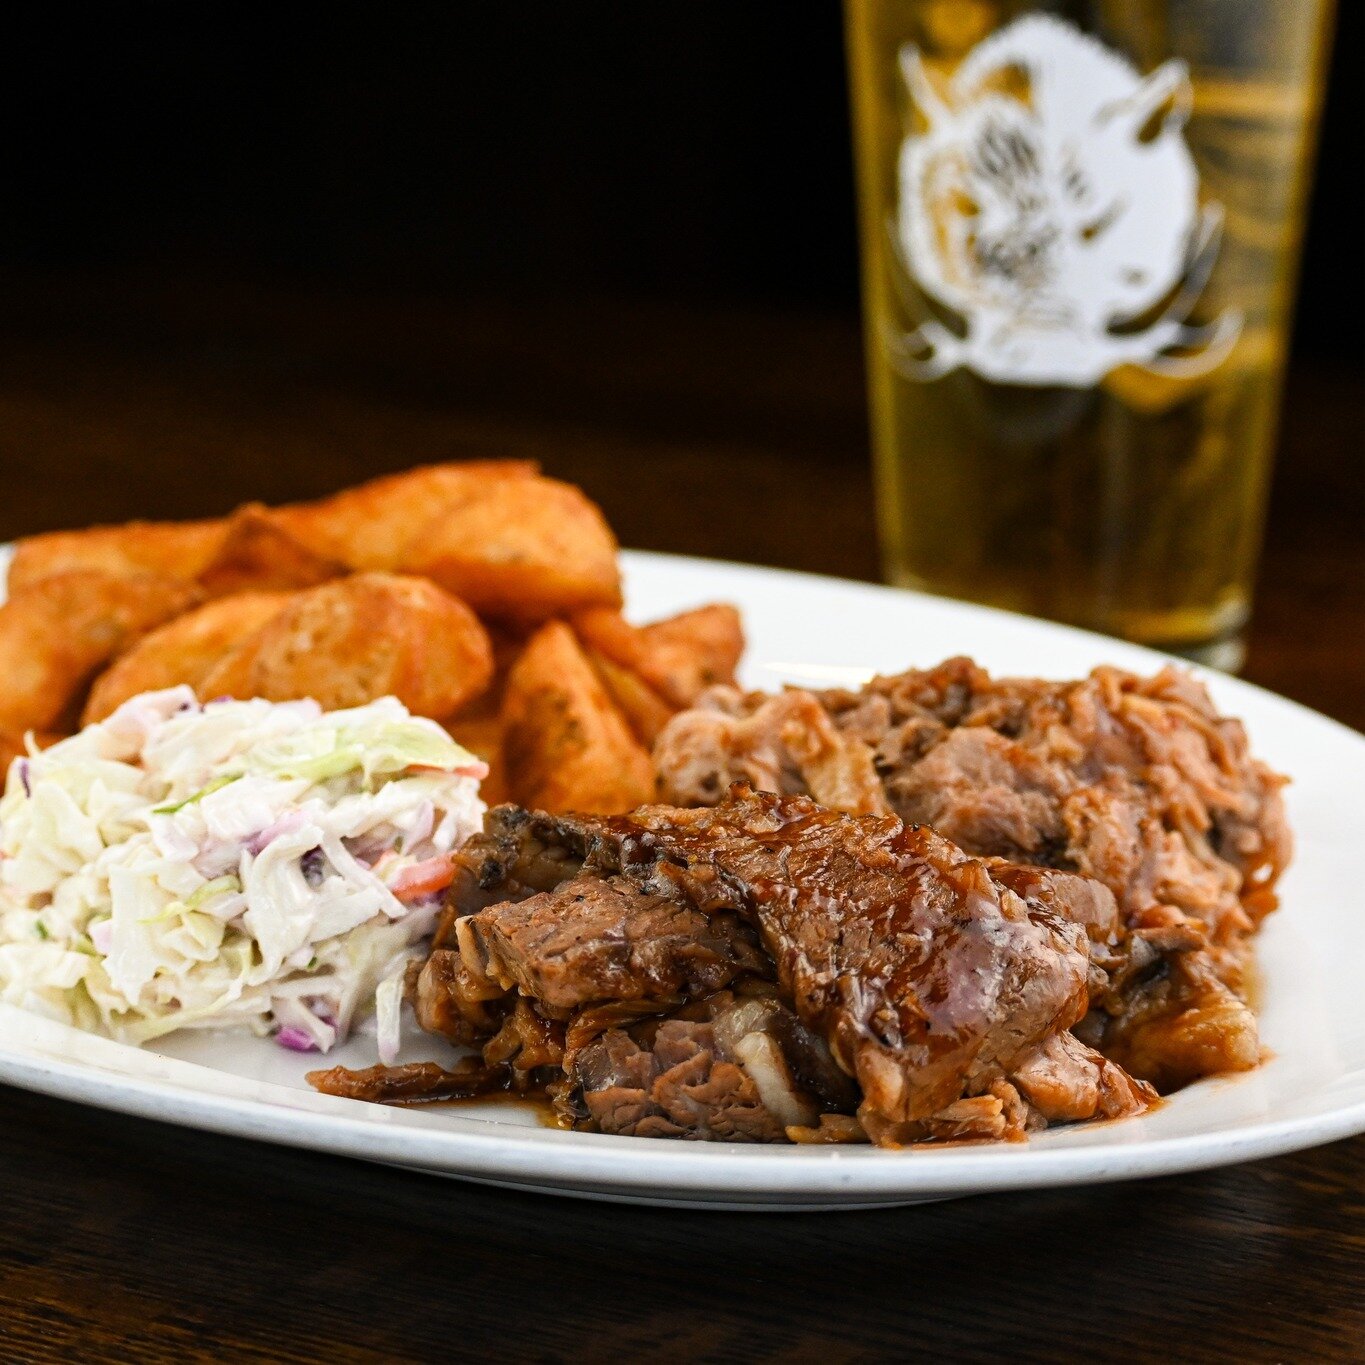 Our Tin City Platter features a delicious combination of pulled pork, smoked beef brisket, and all the fixings. Come and get your BBQ fix at Mad Boar today!

#madboarnc #wallacenc #exit385 #tastethemadness #BBQPerfection #BBQLovers